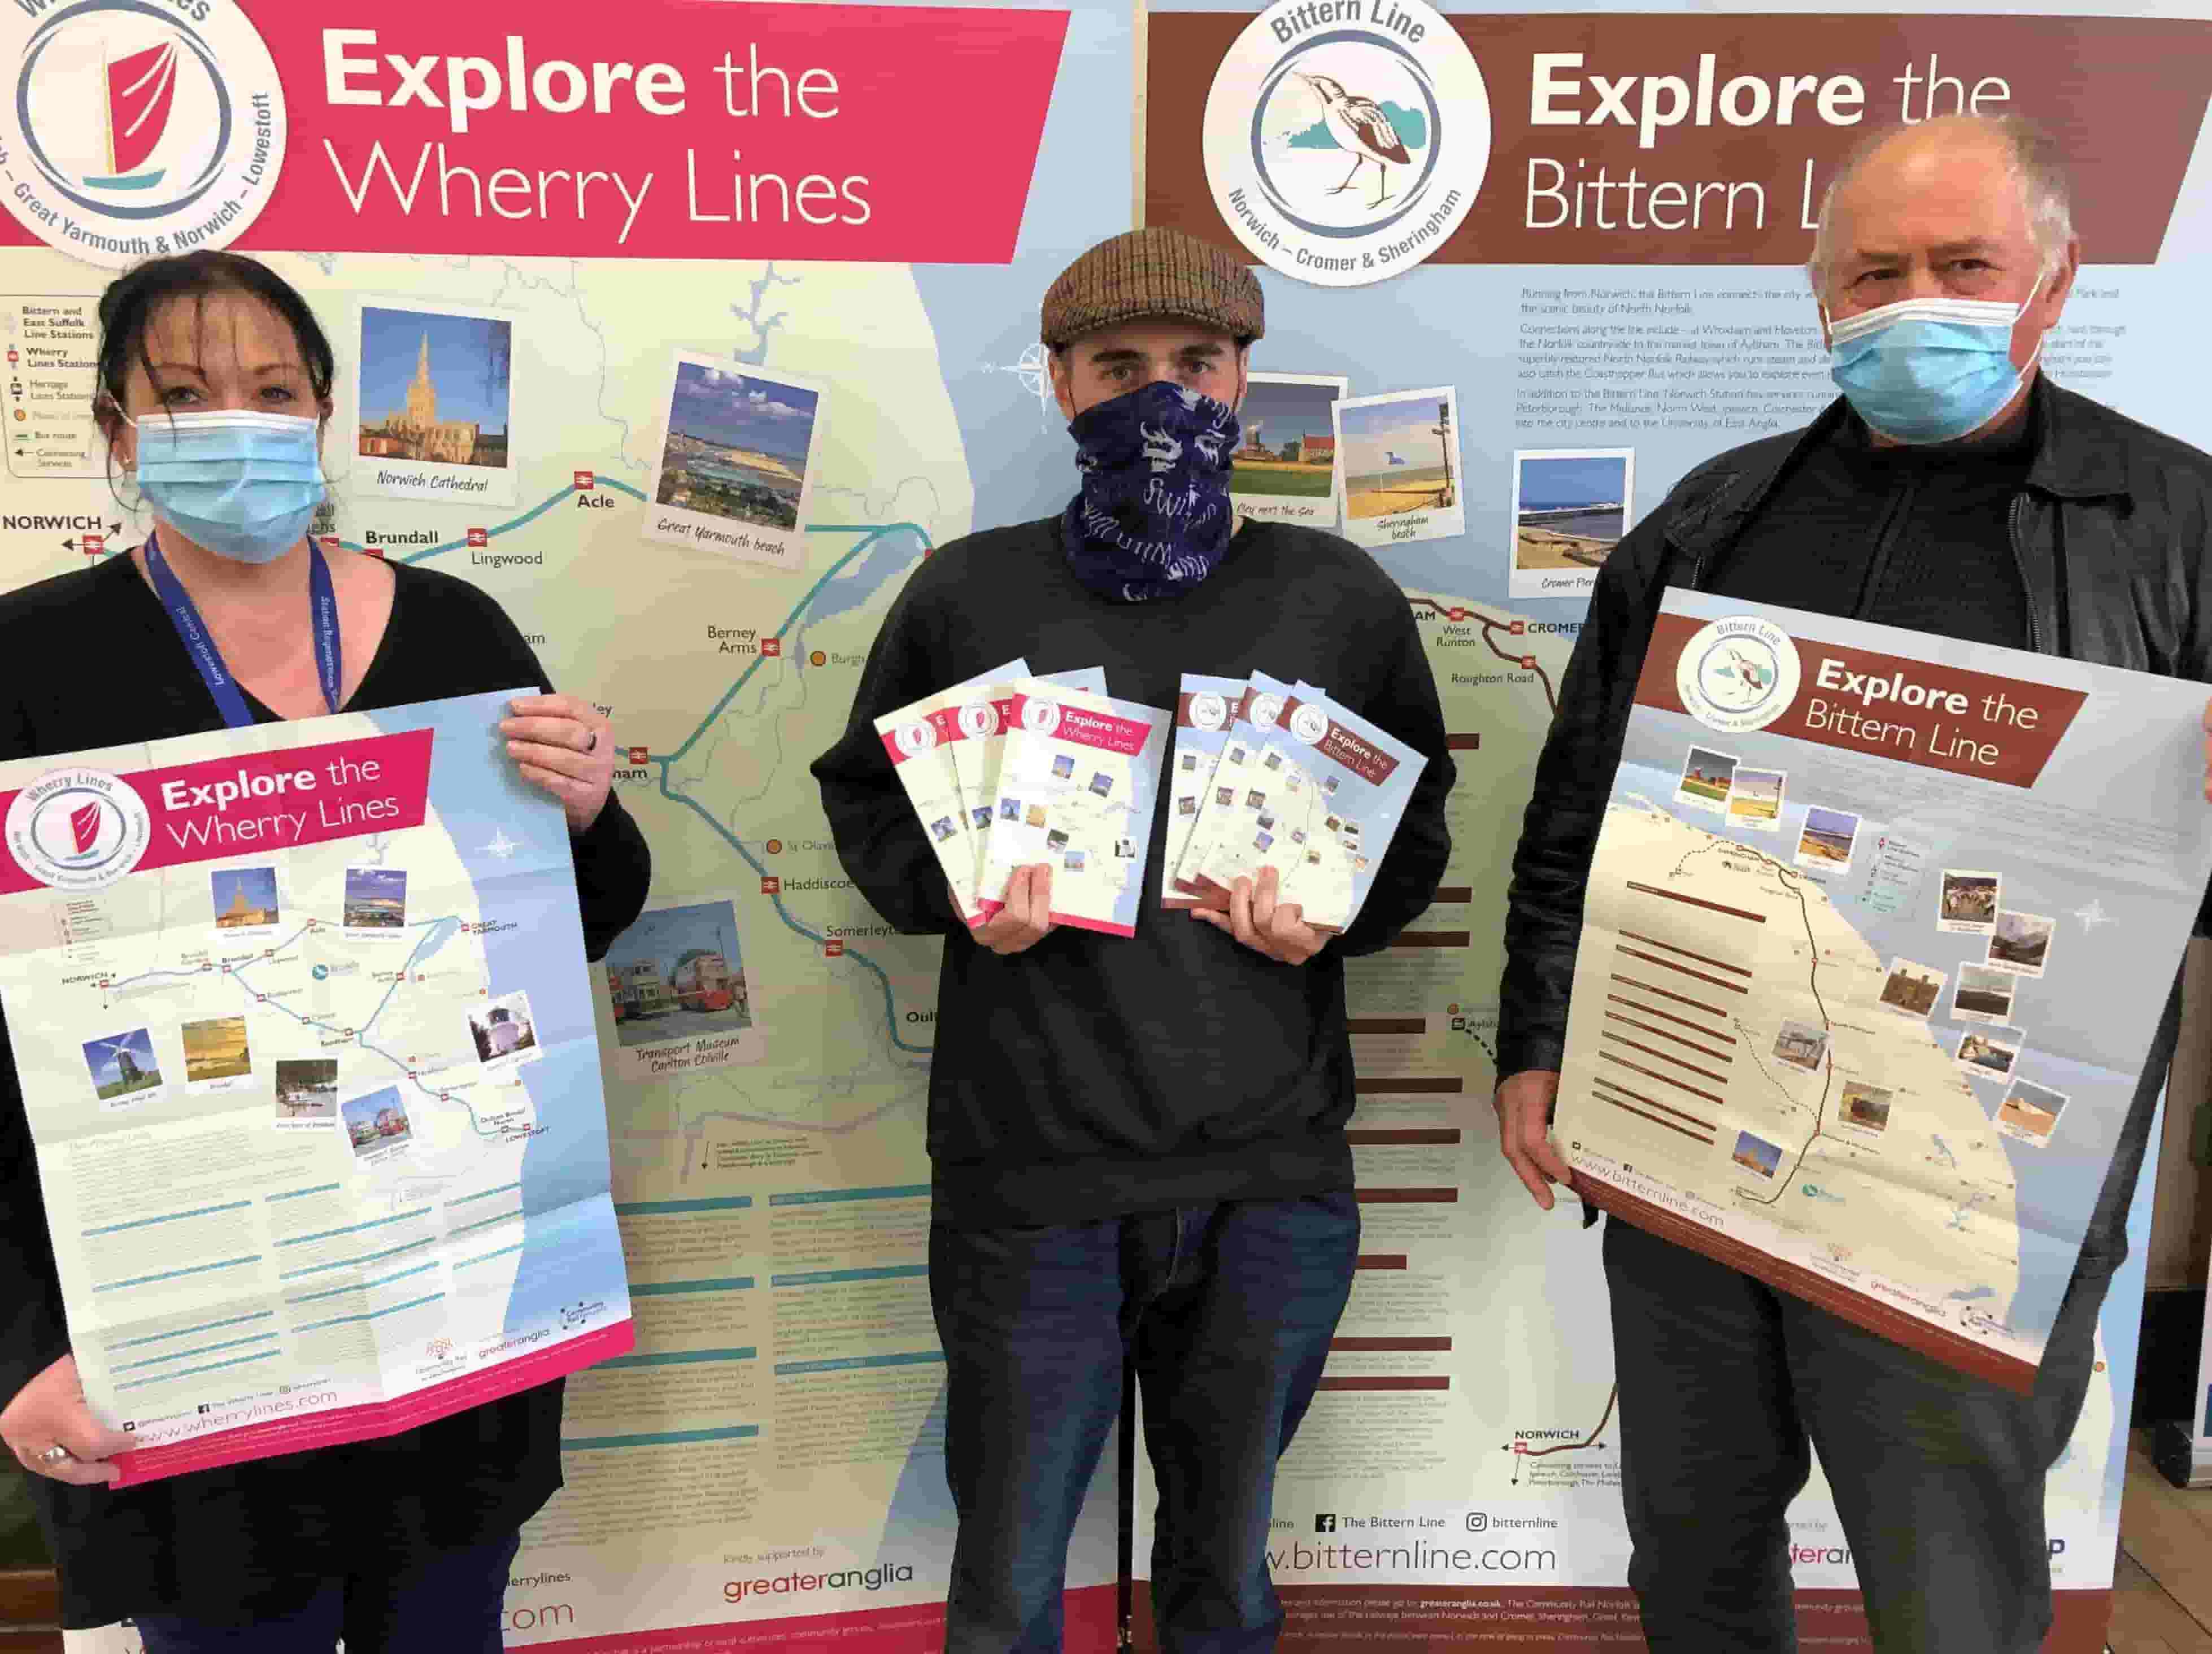 One woman and two men in face coverings holding 'explore the wherry lines' and 'explore the bitten line' posters 